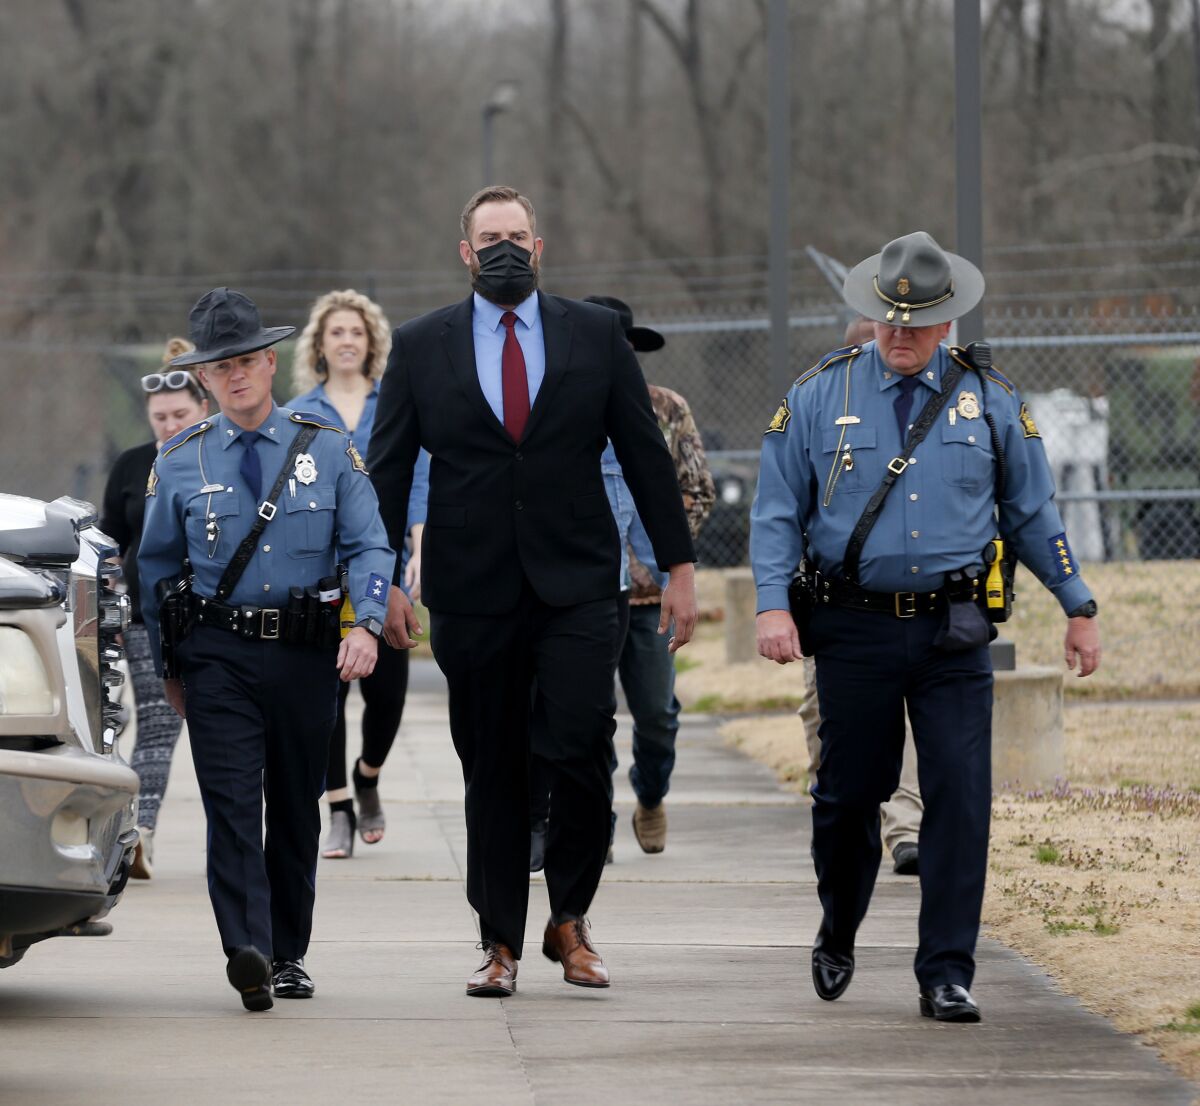 Arkansas State Troopers escort former Lonoke County sheriff's deputy, Michael Davis, center, into the Cabot Readiness Center in Cabot, Ark., on Tuesday, March 15, 2022. A jury was seated Tuesday in the trial of Davis, a former Arkansas deputy charged with manslaughter for fatally shooting a white teenager during a traffic stop, a case that has drawn the attention of national civil rights activists. (Thomas Metthe/The Arkansas Democrat-Gazette via AP)